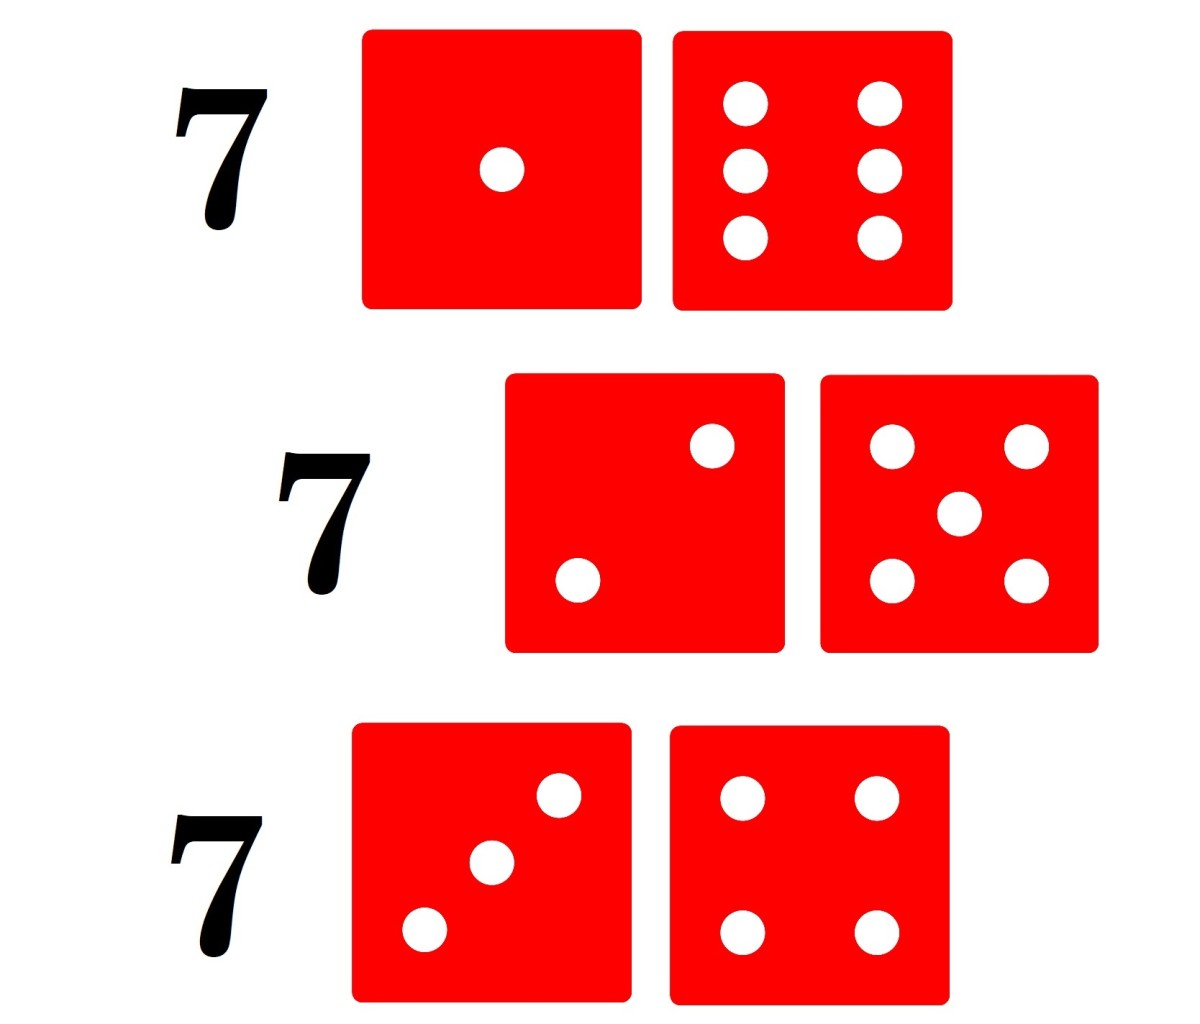 Place a board game with two dice and pretty soon you will learn that a number, such as 7 can be created from several different number combinations. In math class, this is called factoring!